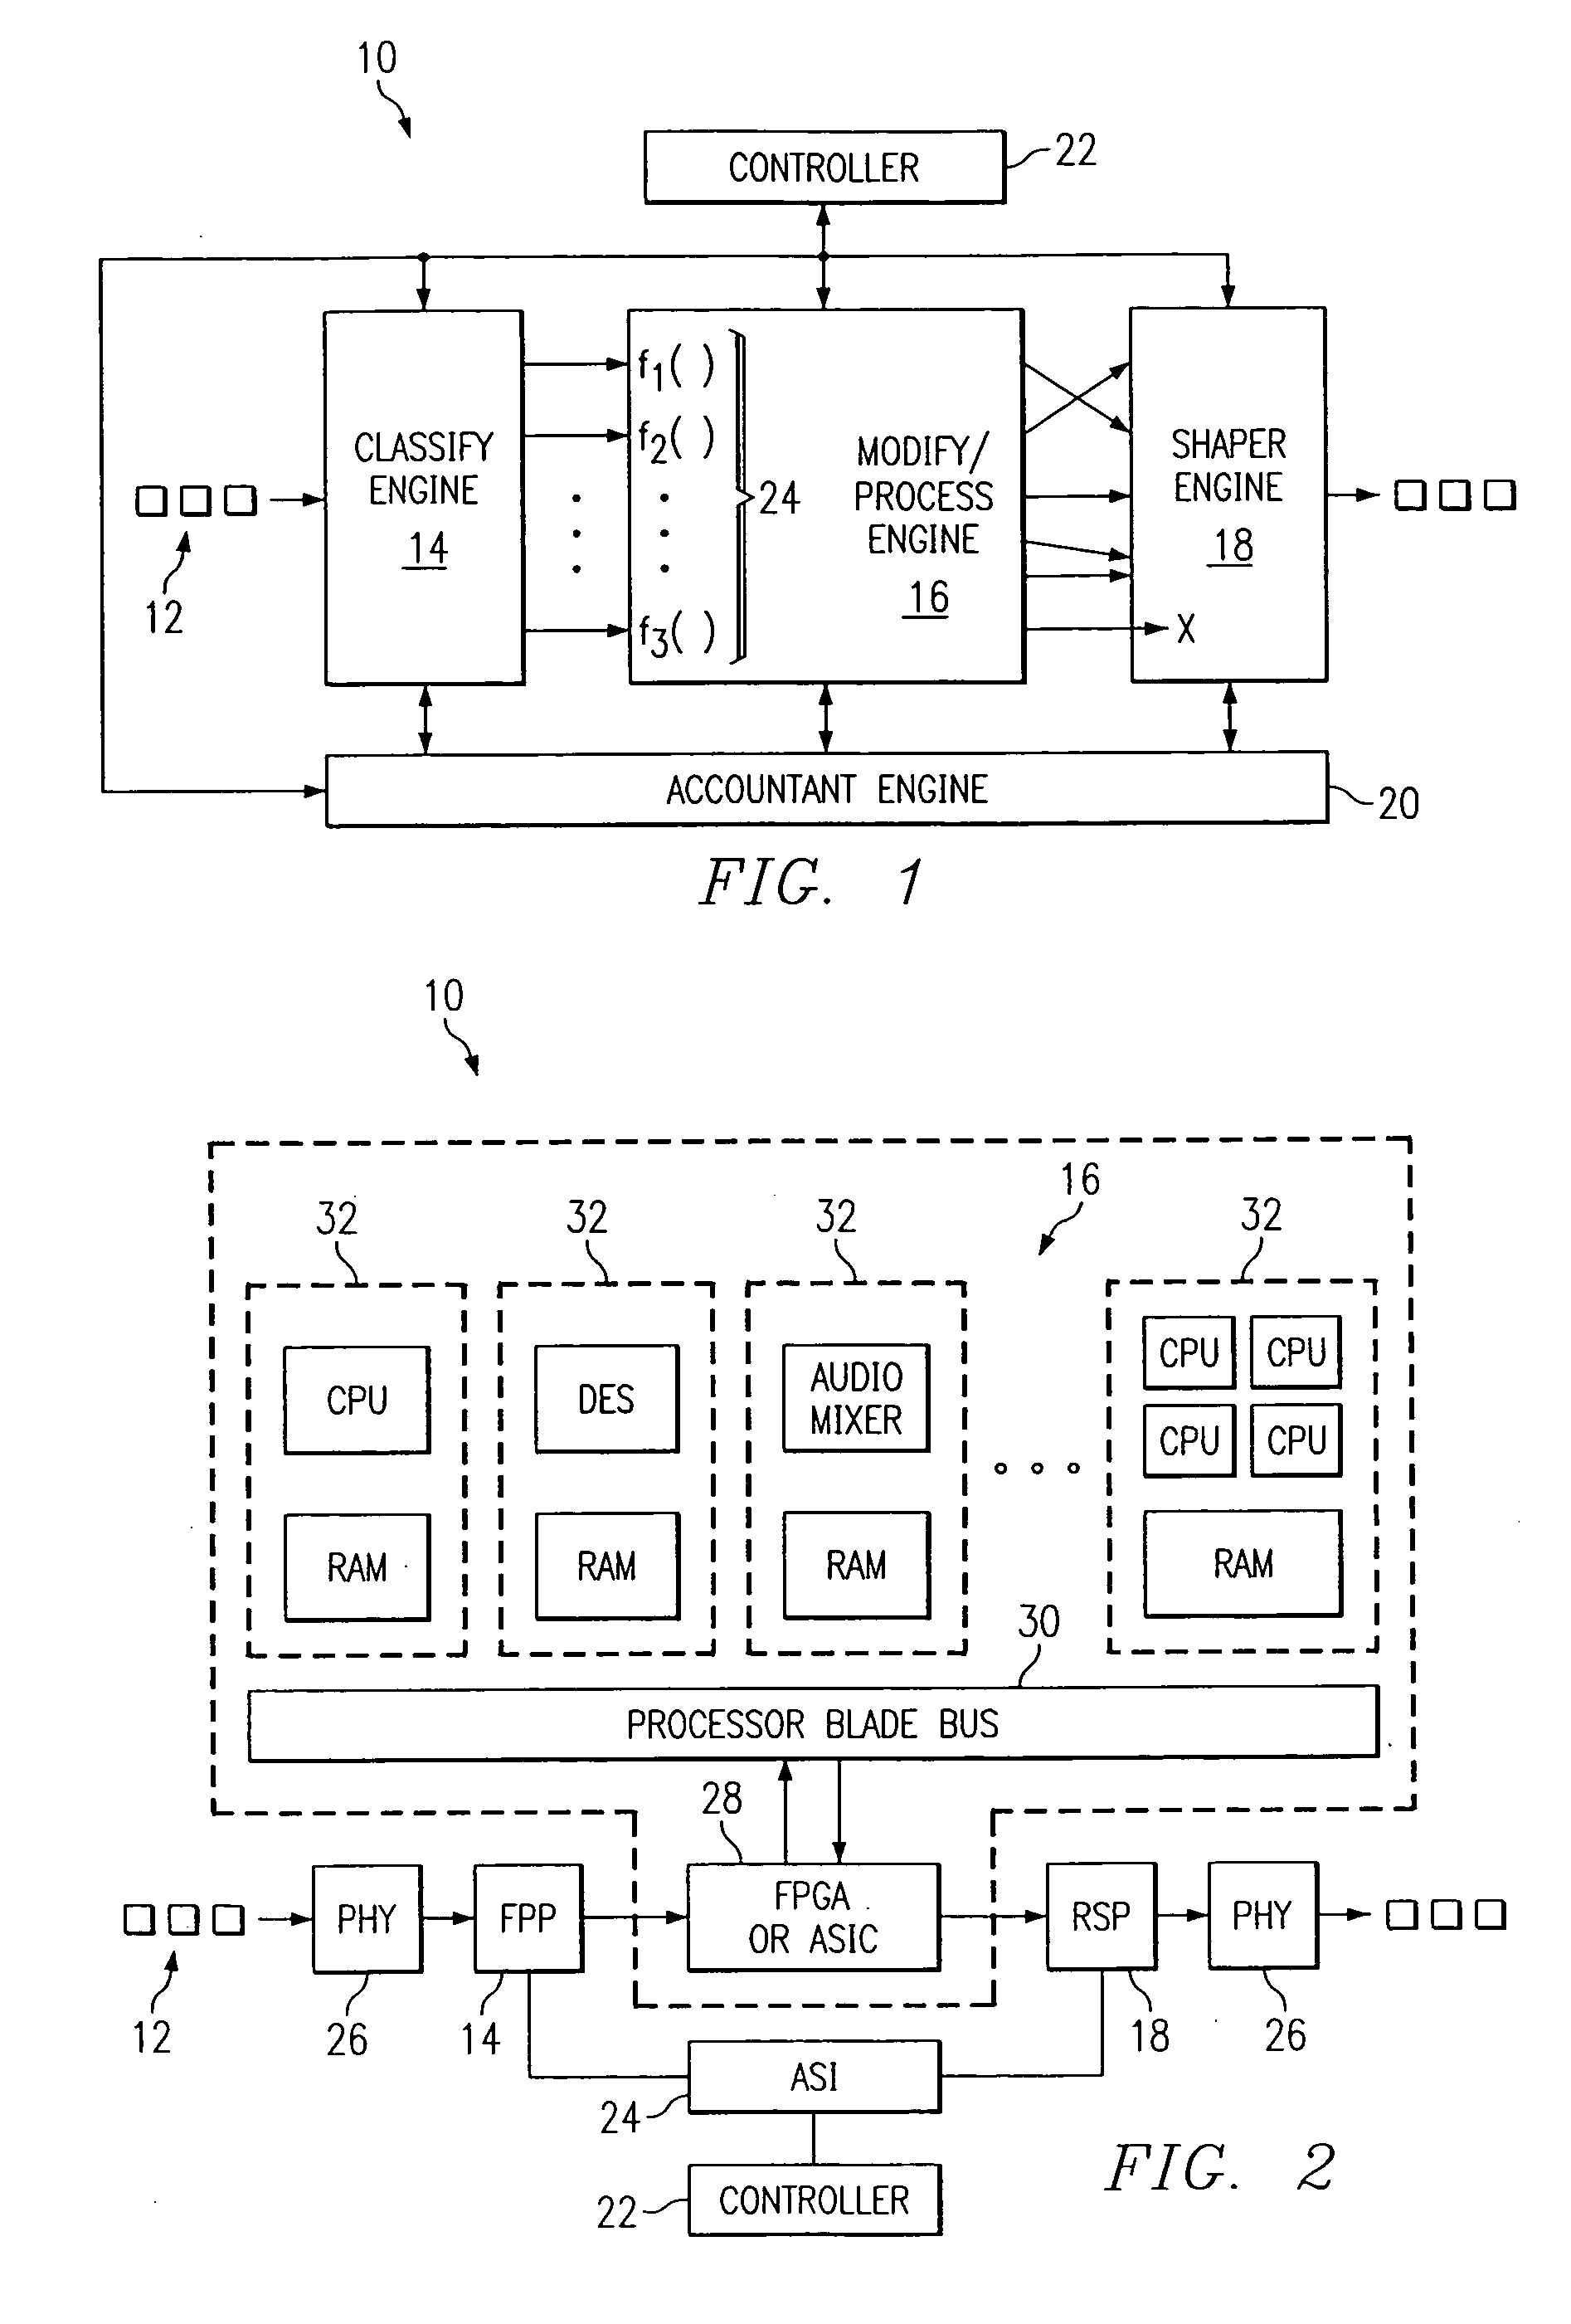 System and method for processing network packet flows